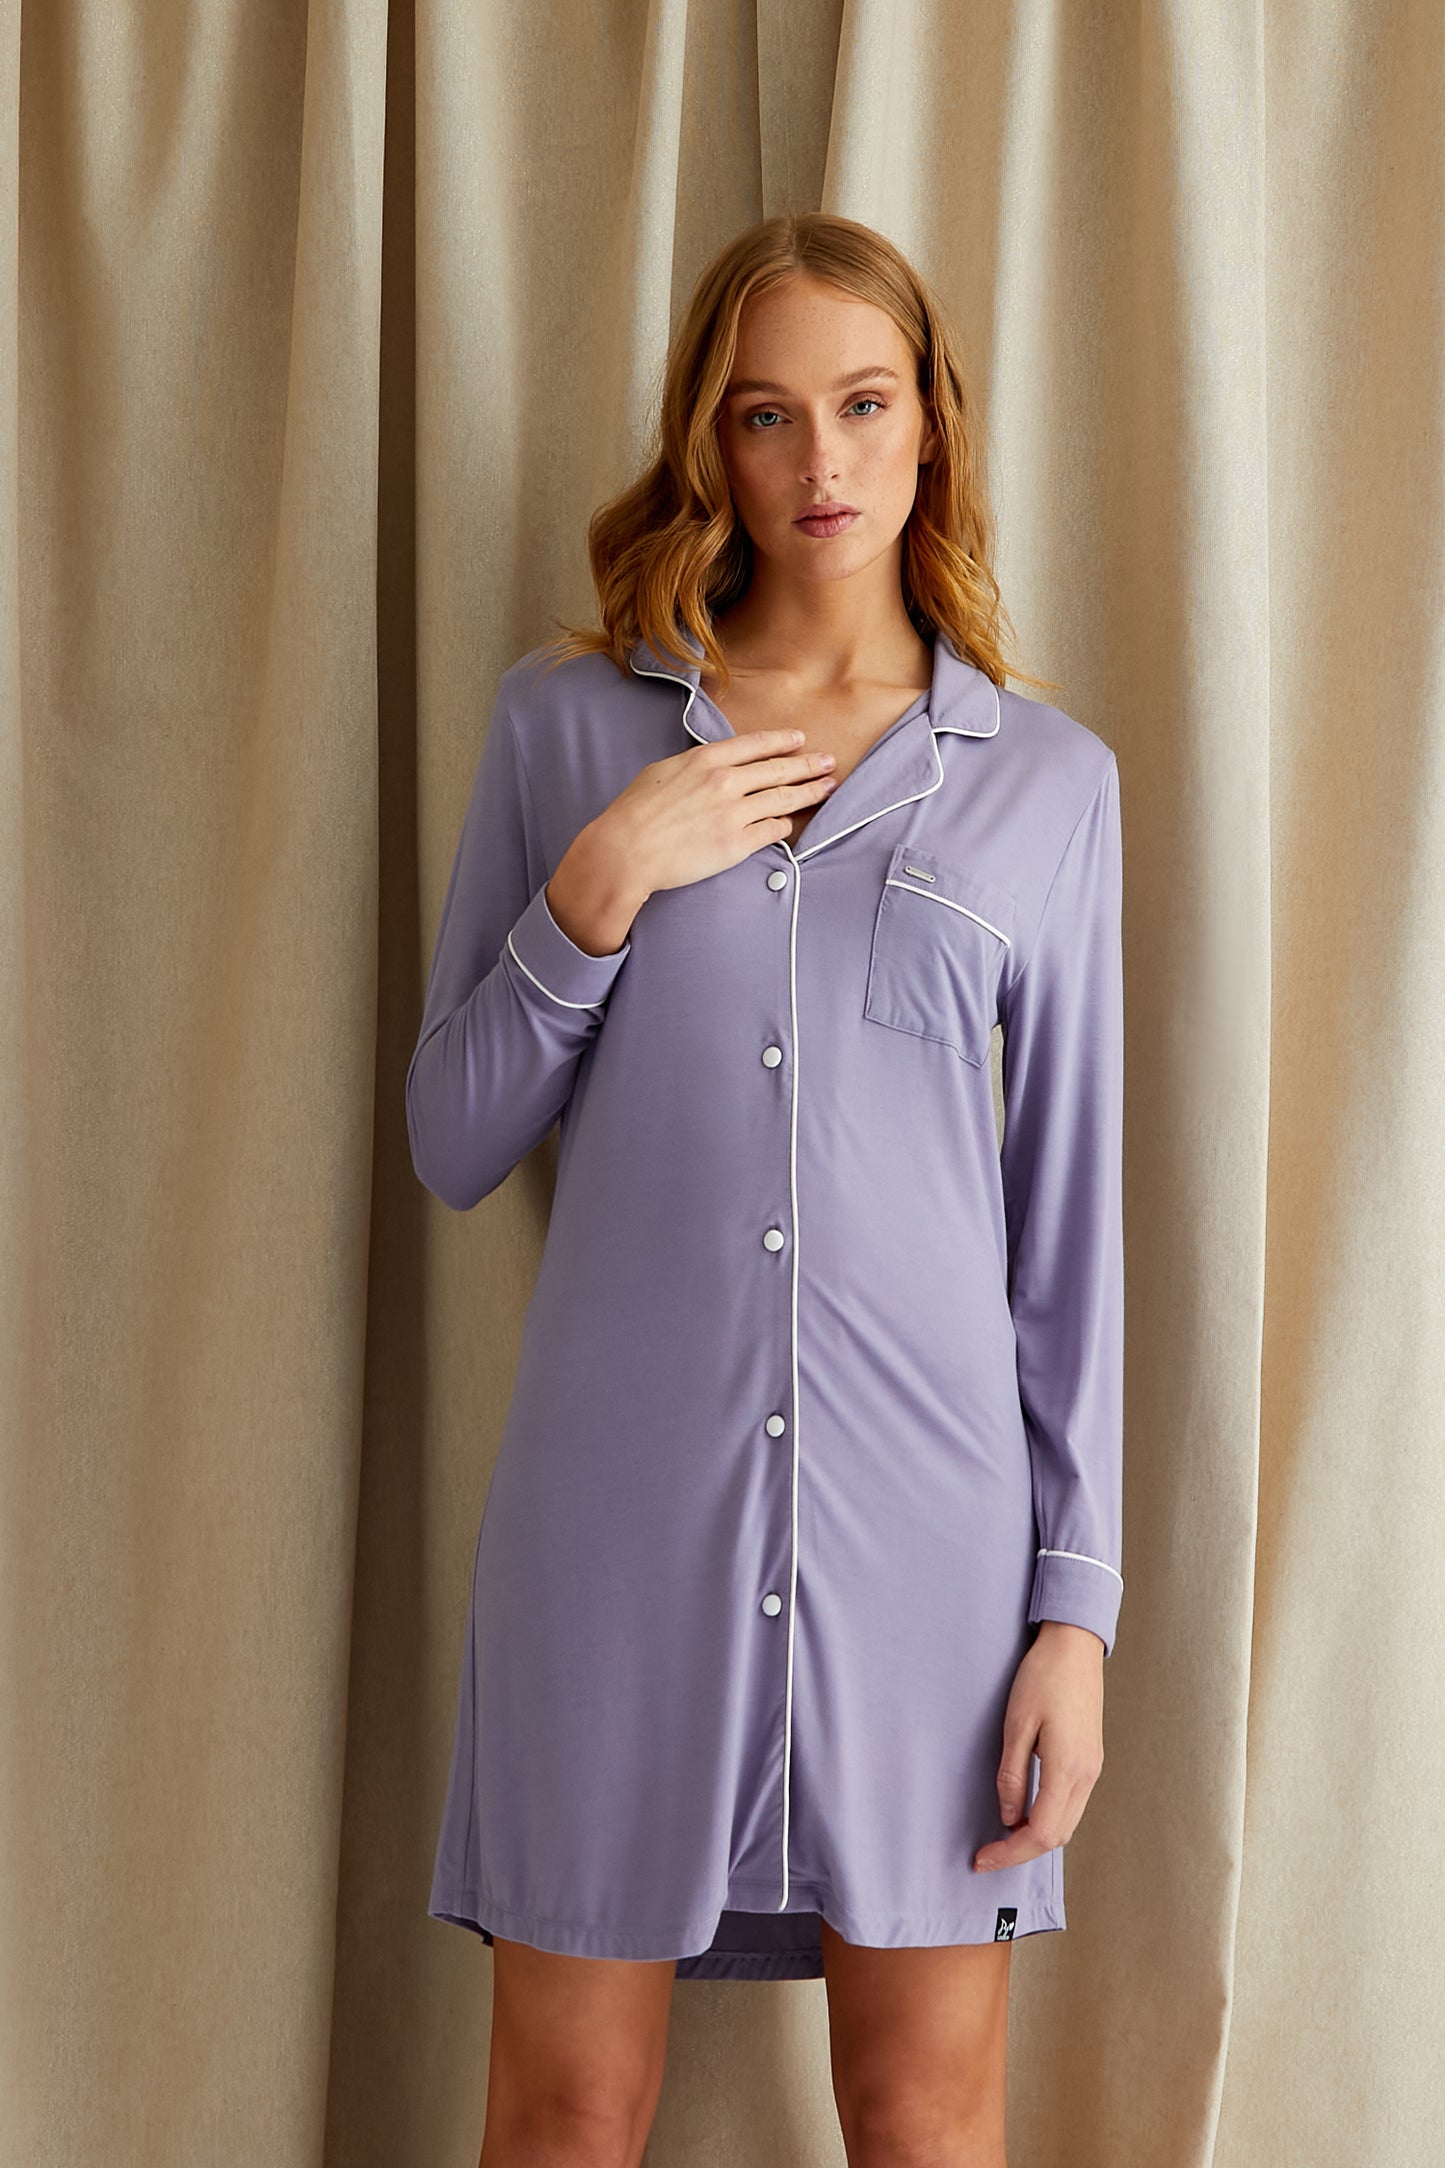 
                  
                    Women's Bamboo Nightshirt in Lavender with functional button up fastening, revere collar and contrast colour piping from Pretty You London
                  
                